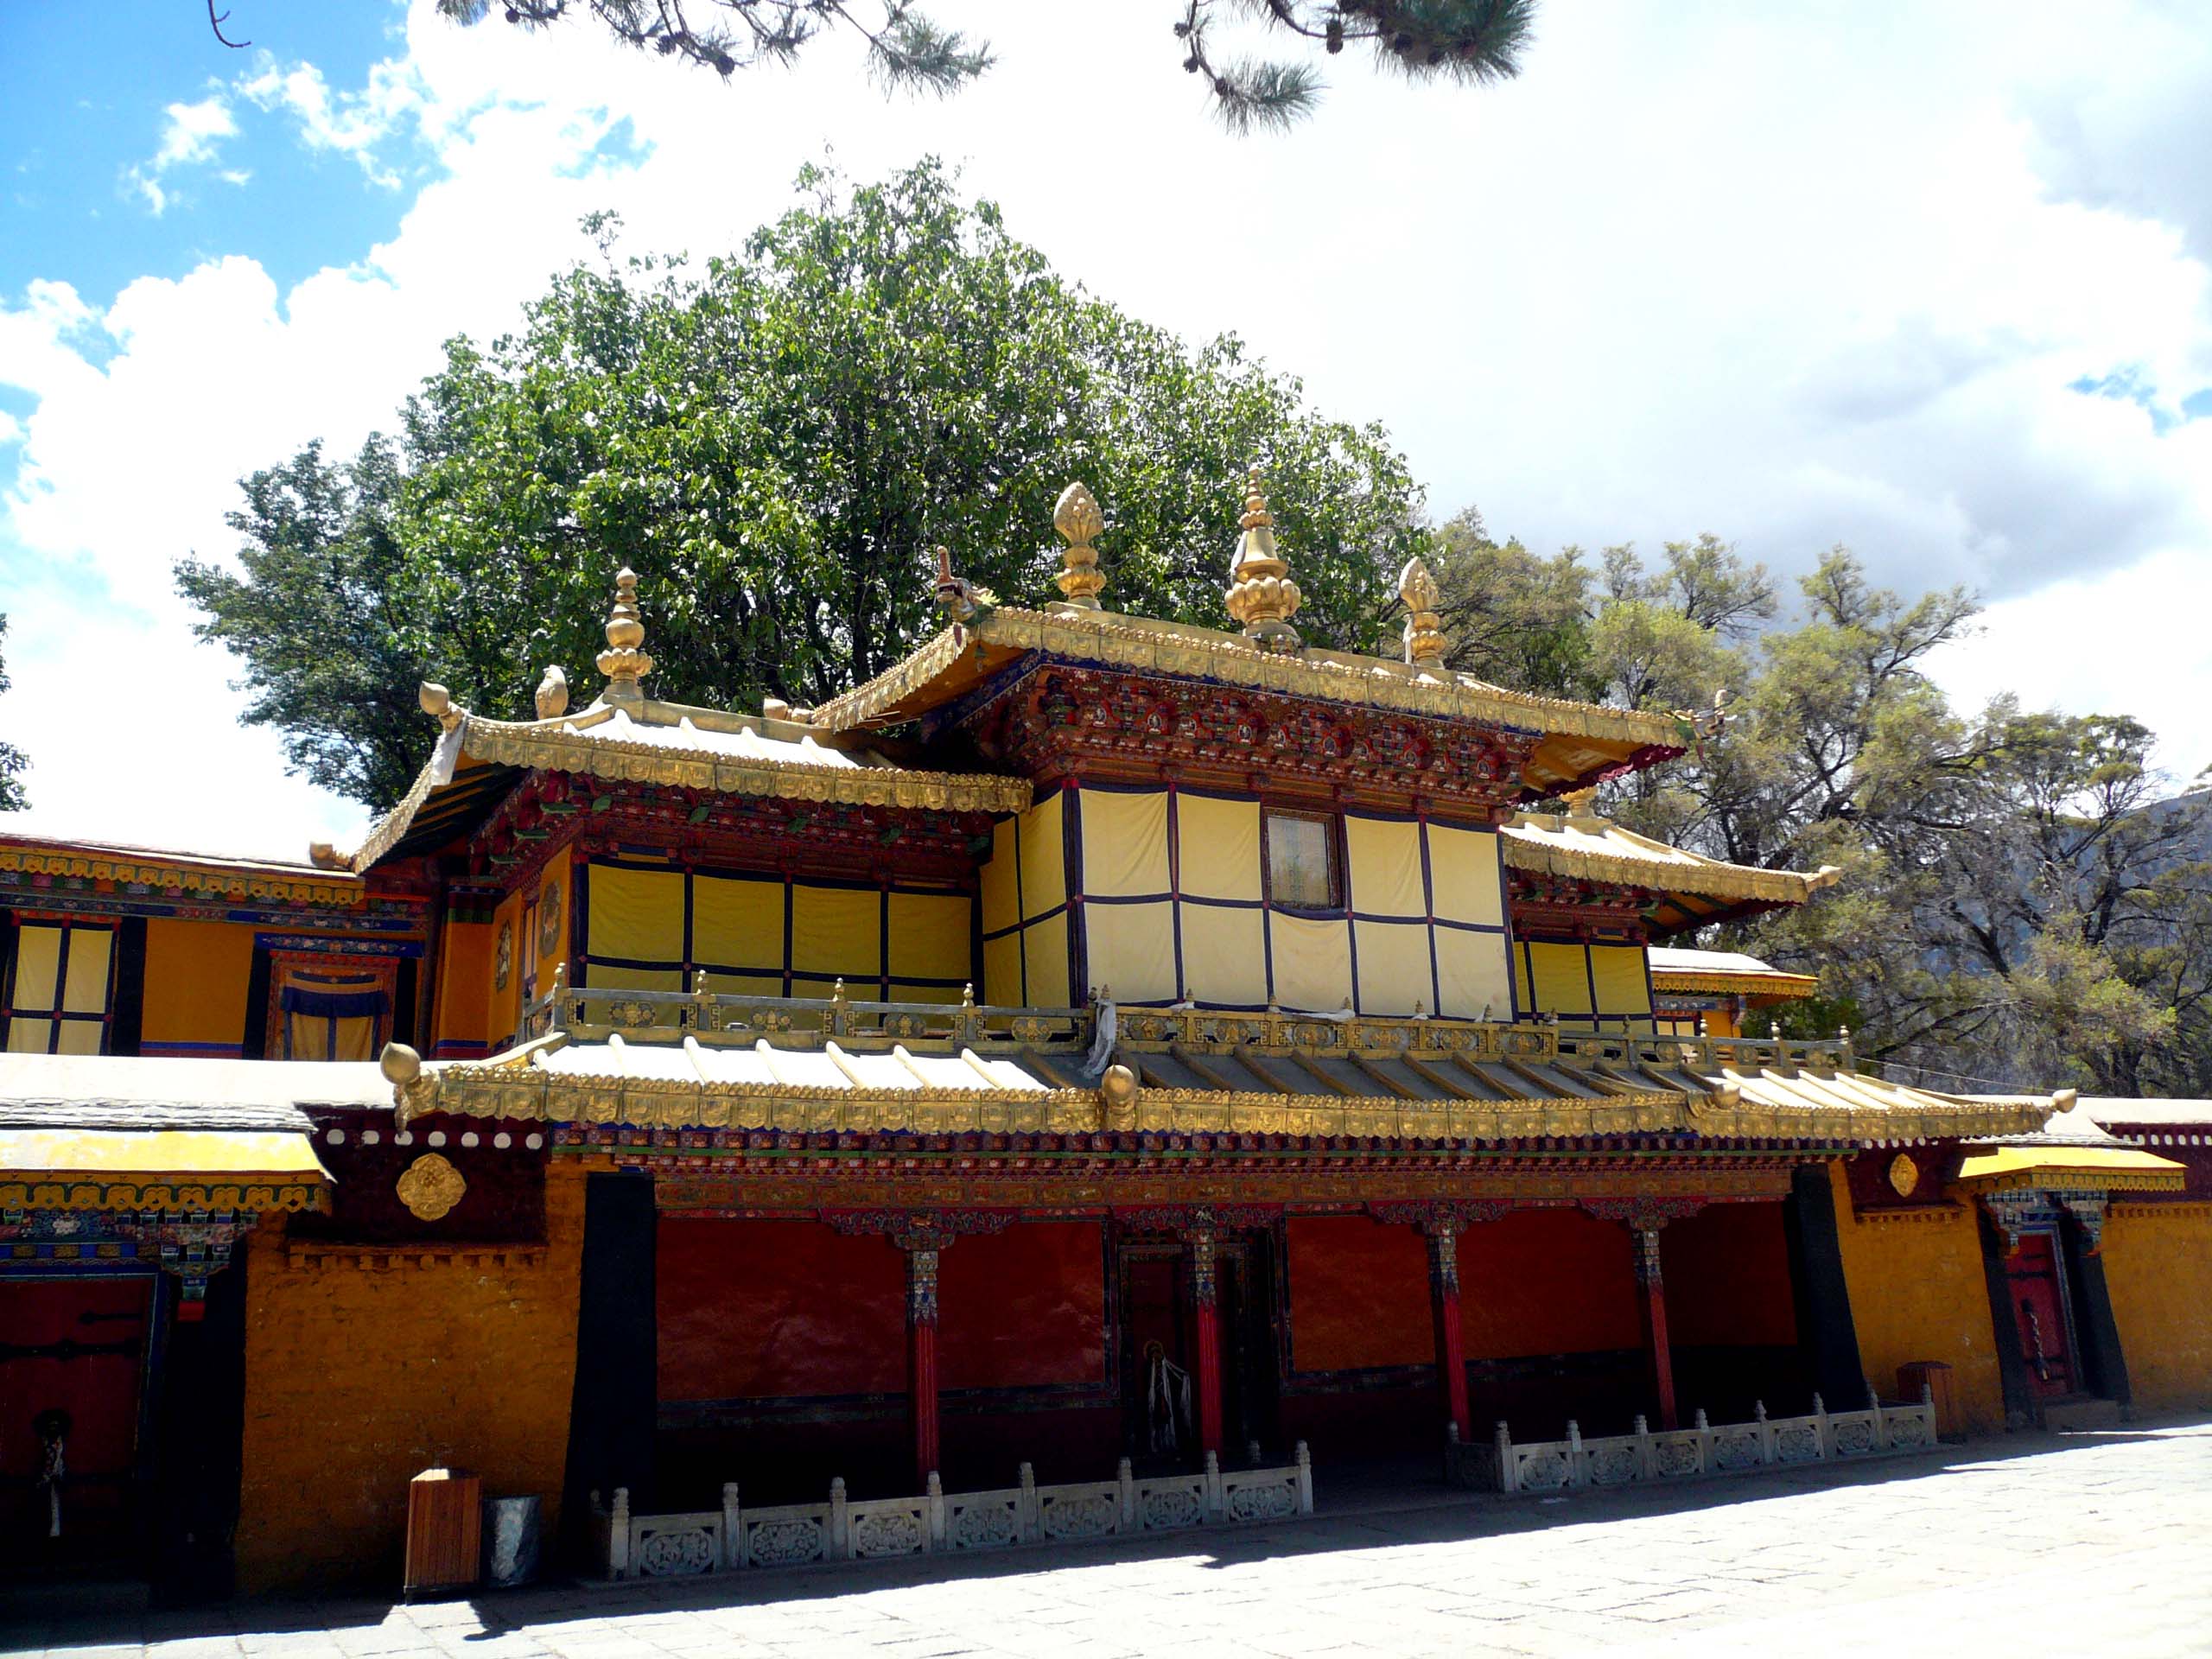 Performances used to be held at the open area infront of this building where the Dalai Lama watched from the small window above.